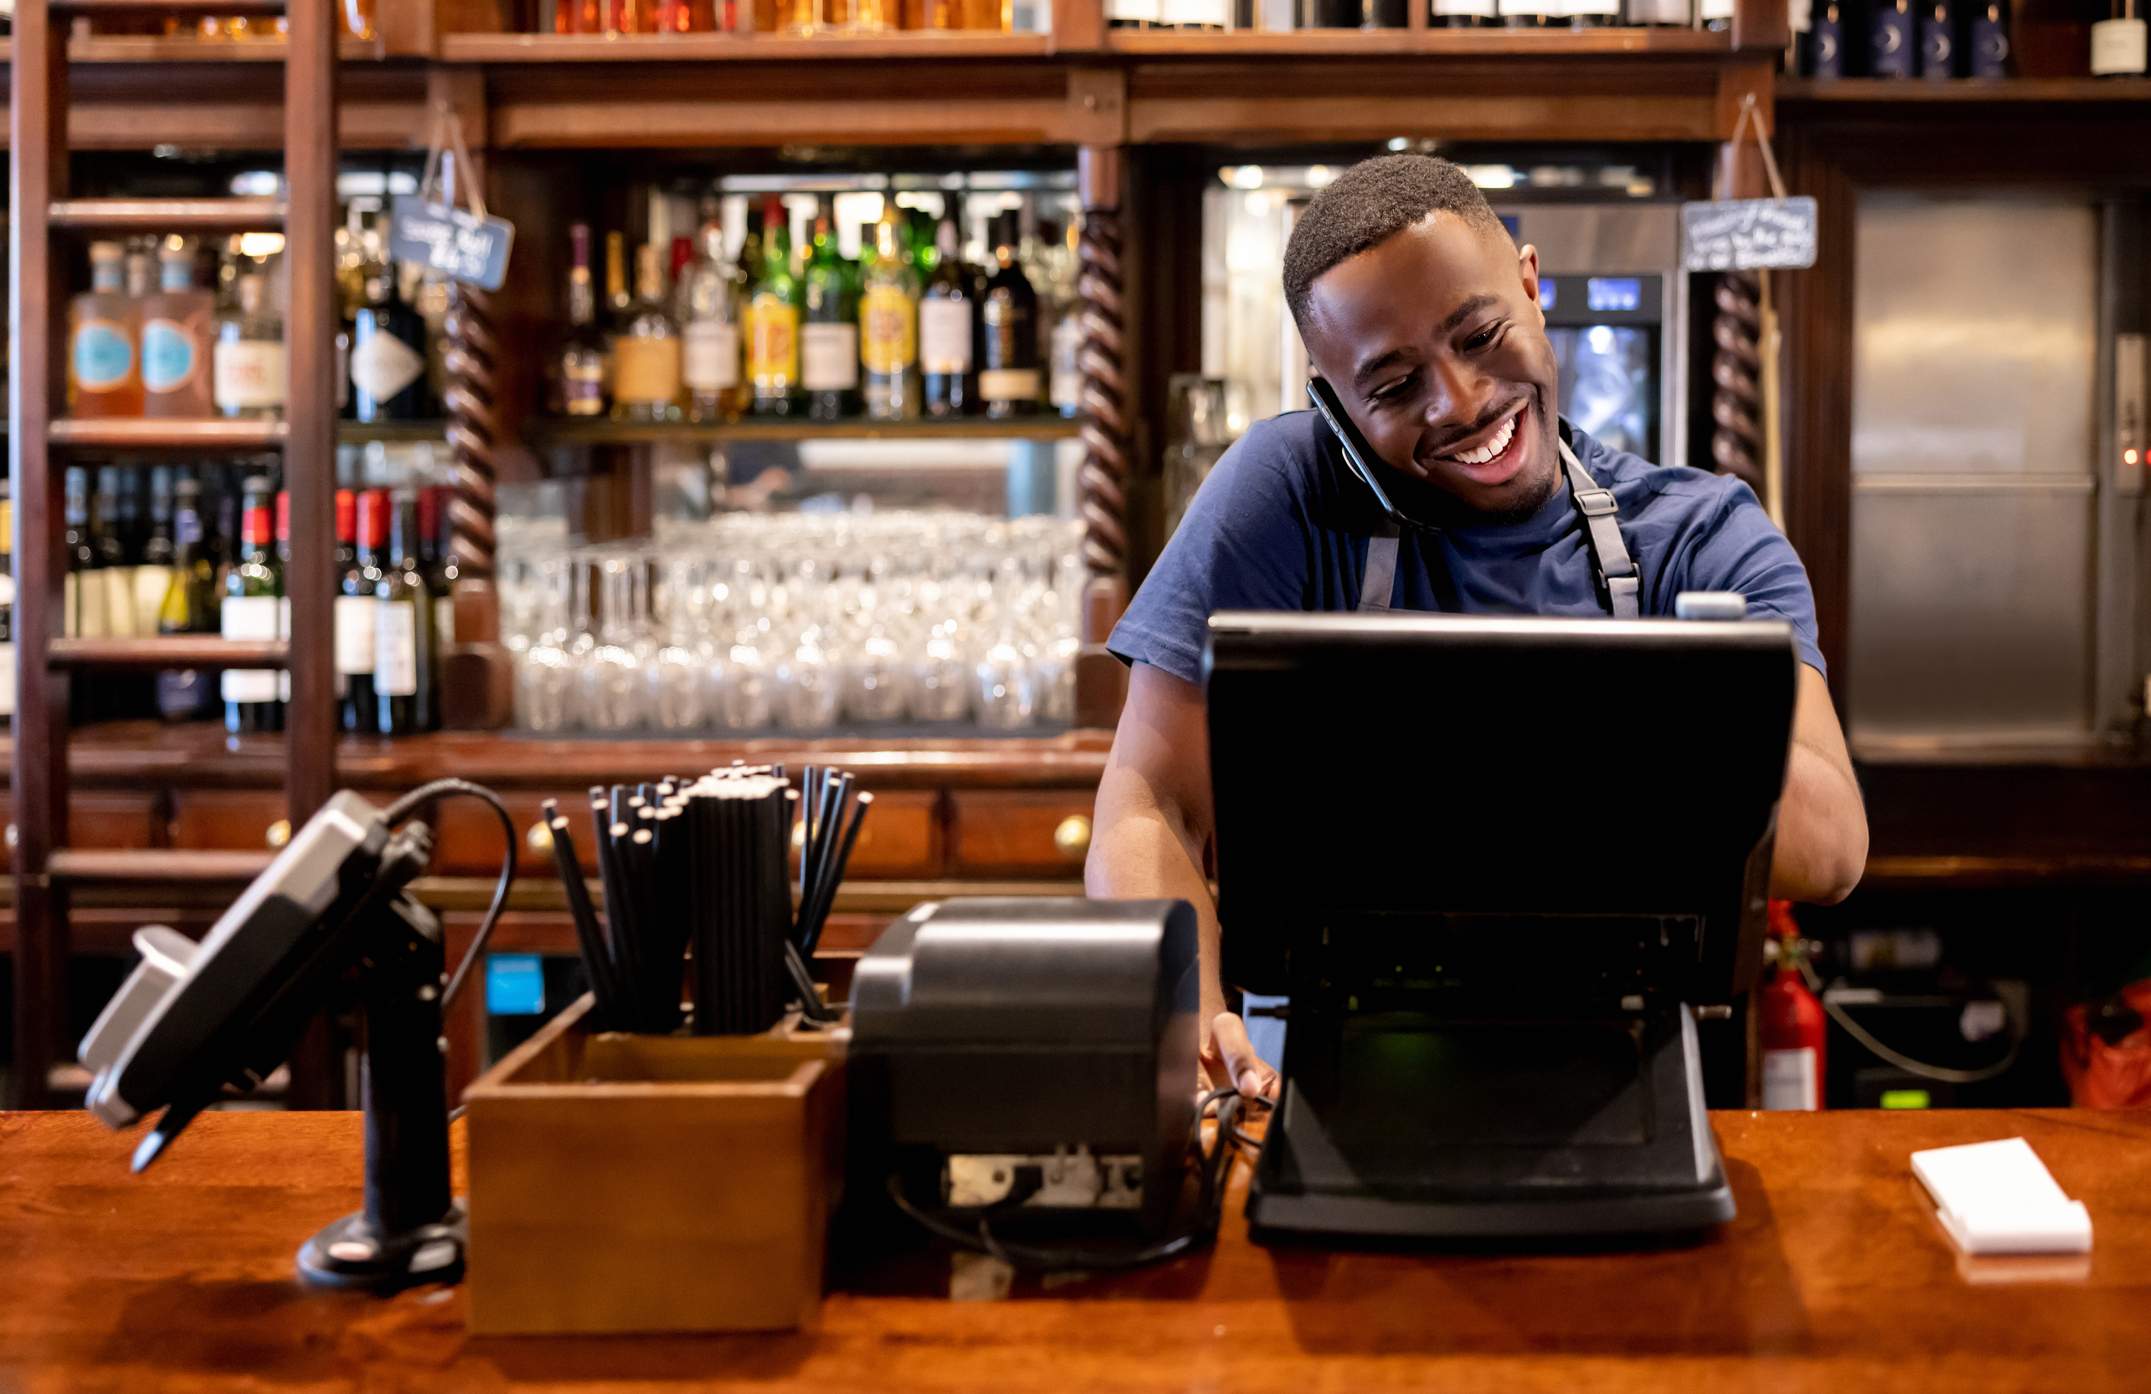 Image depicts a server wearing a blue t-shirt and black apron speaking to someone on the phone while they use a computer in front of them. There is a bar set up behind them. 